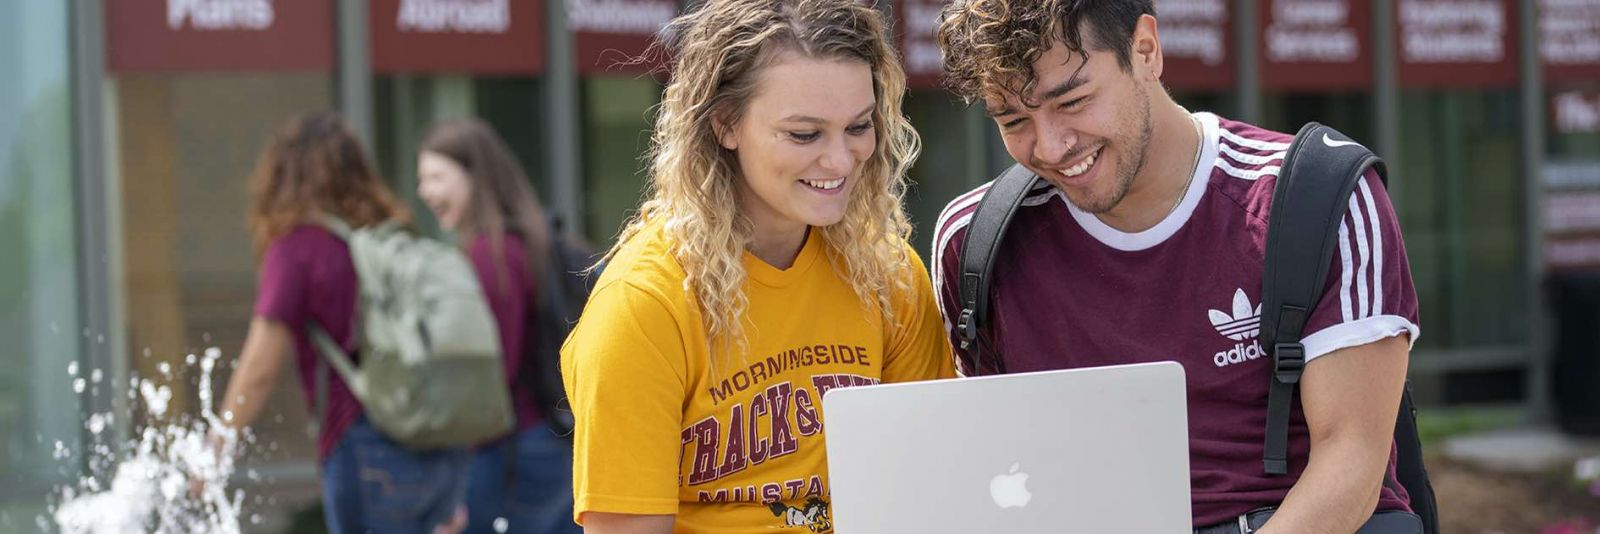 Students look at laptop outside by fountain